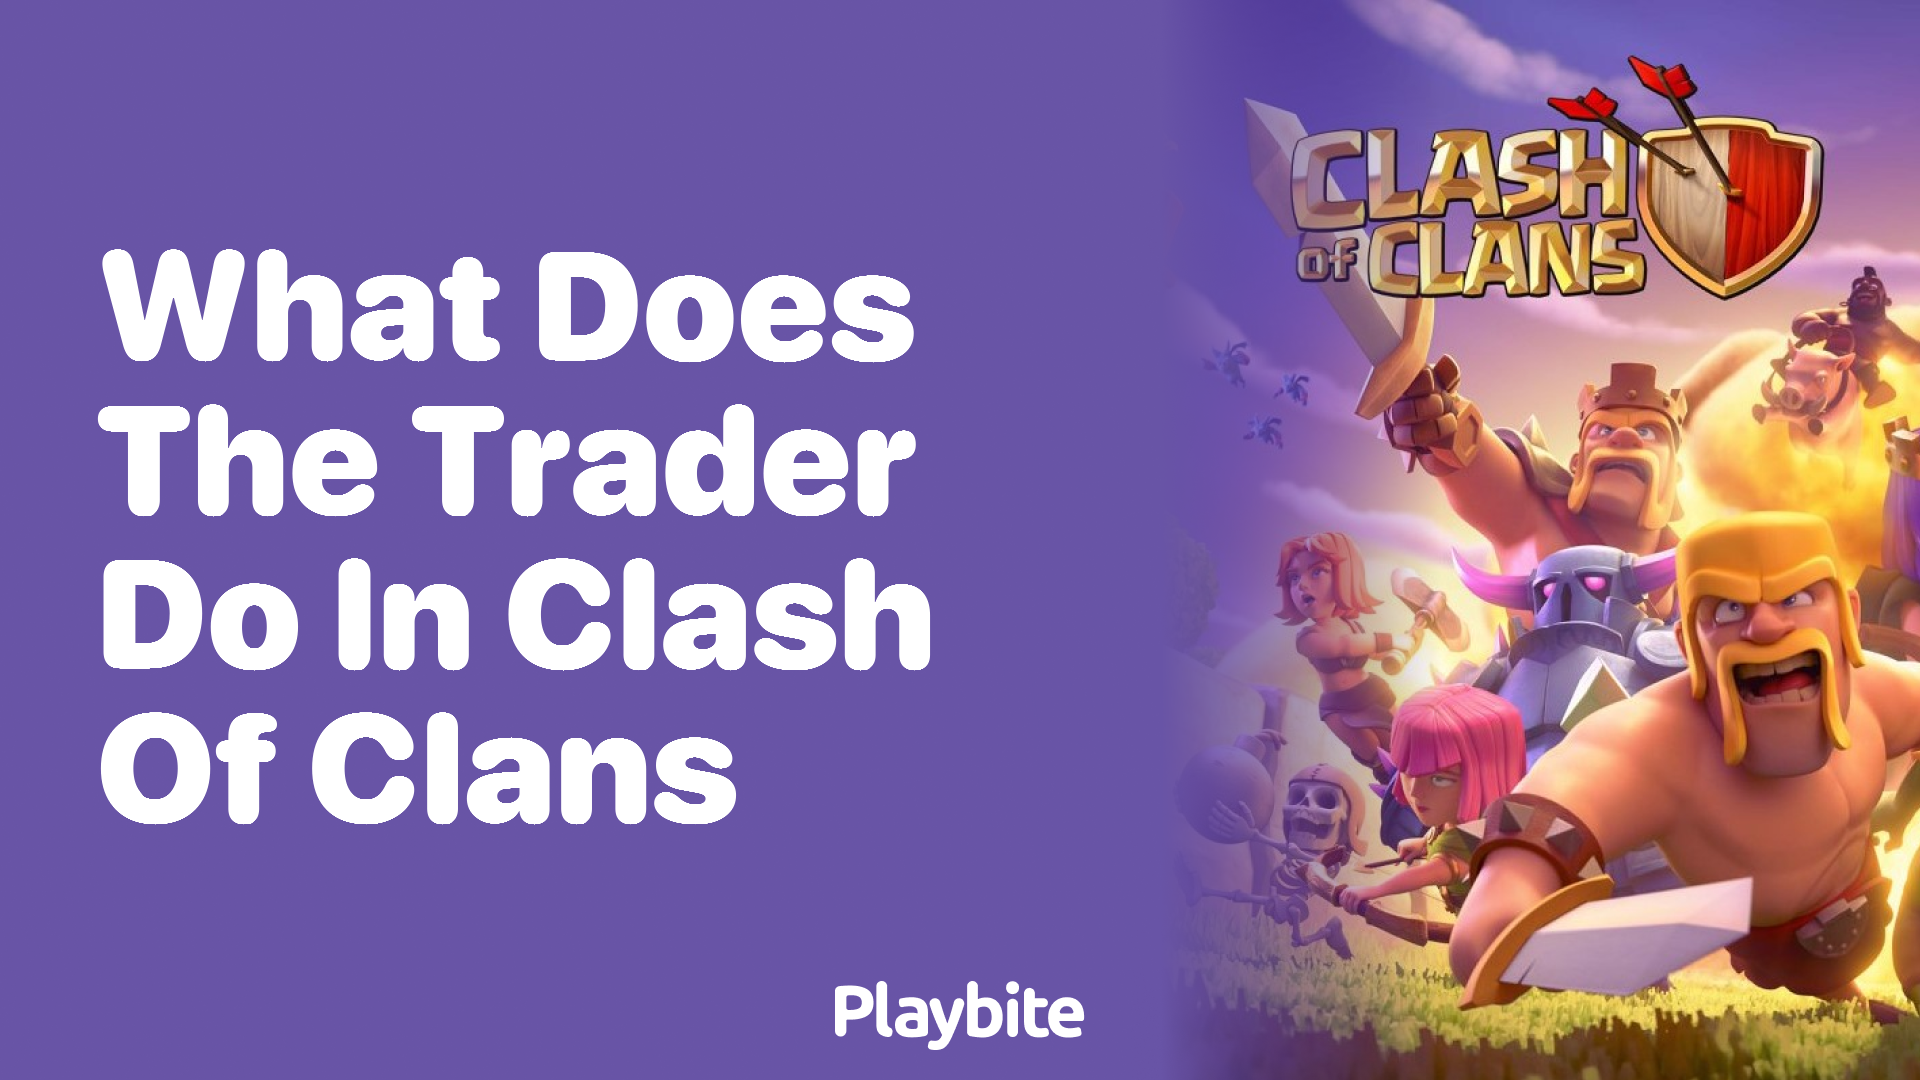 What Does the Trader Do in Clash of Clans?